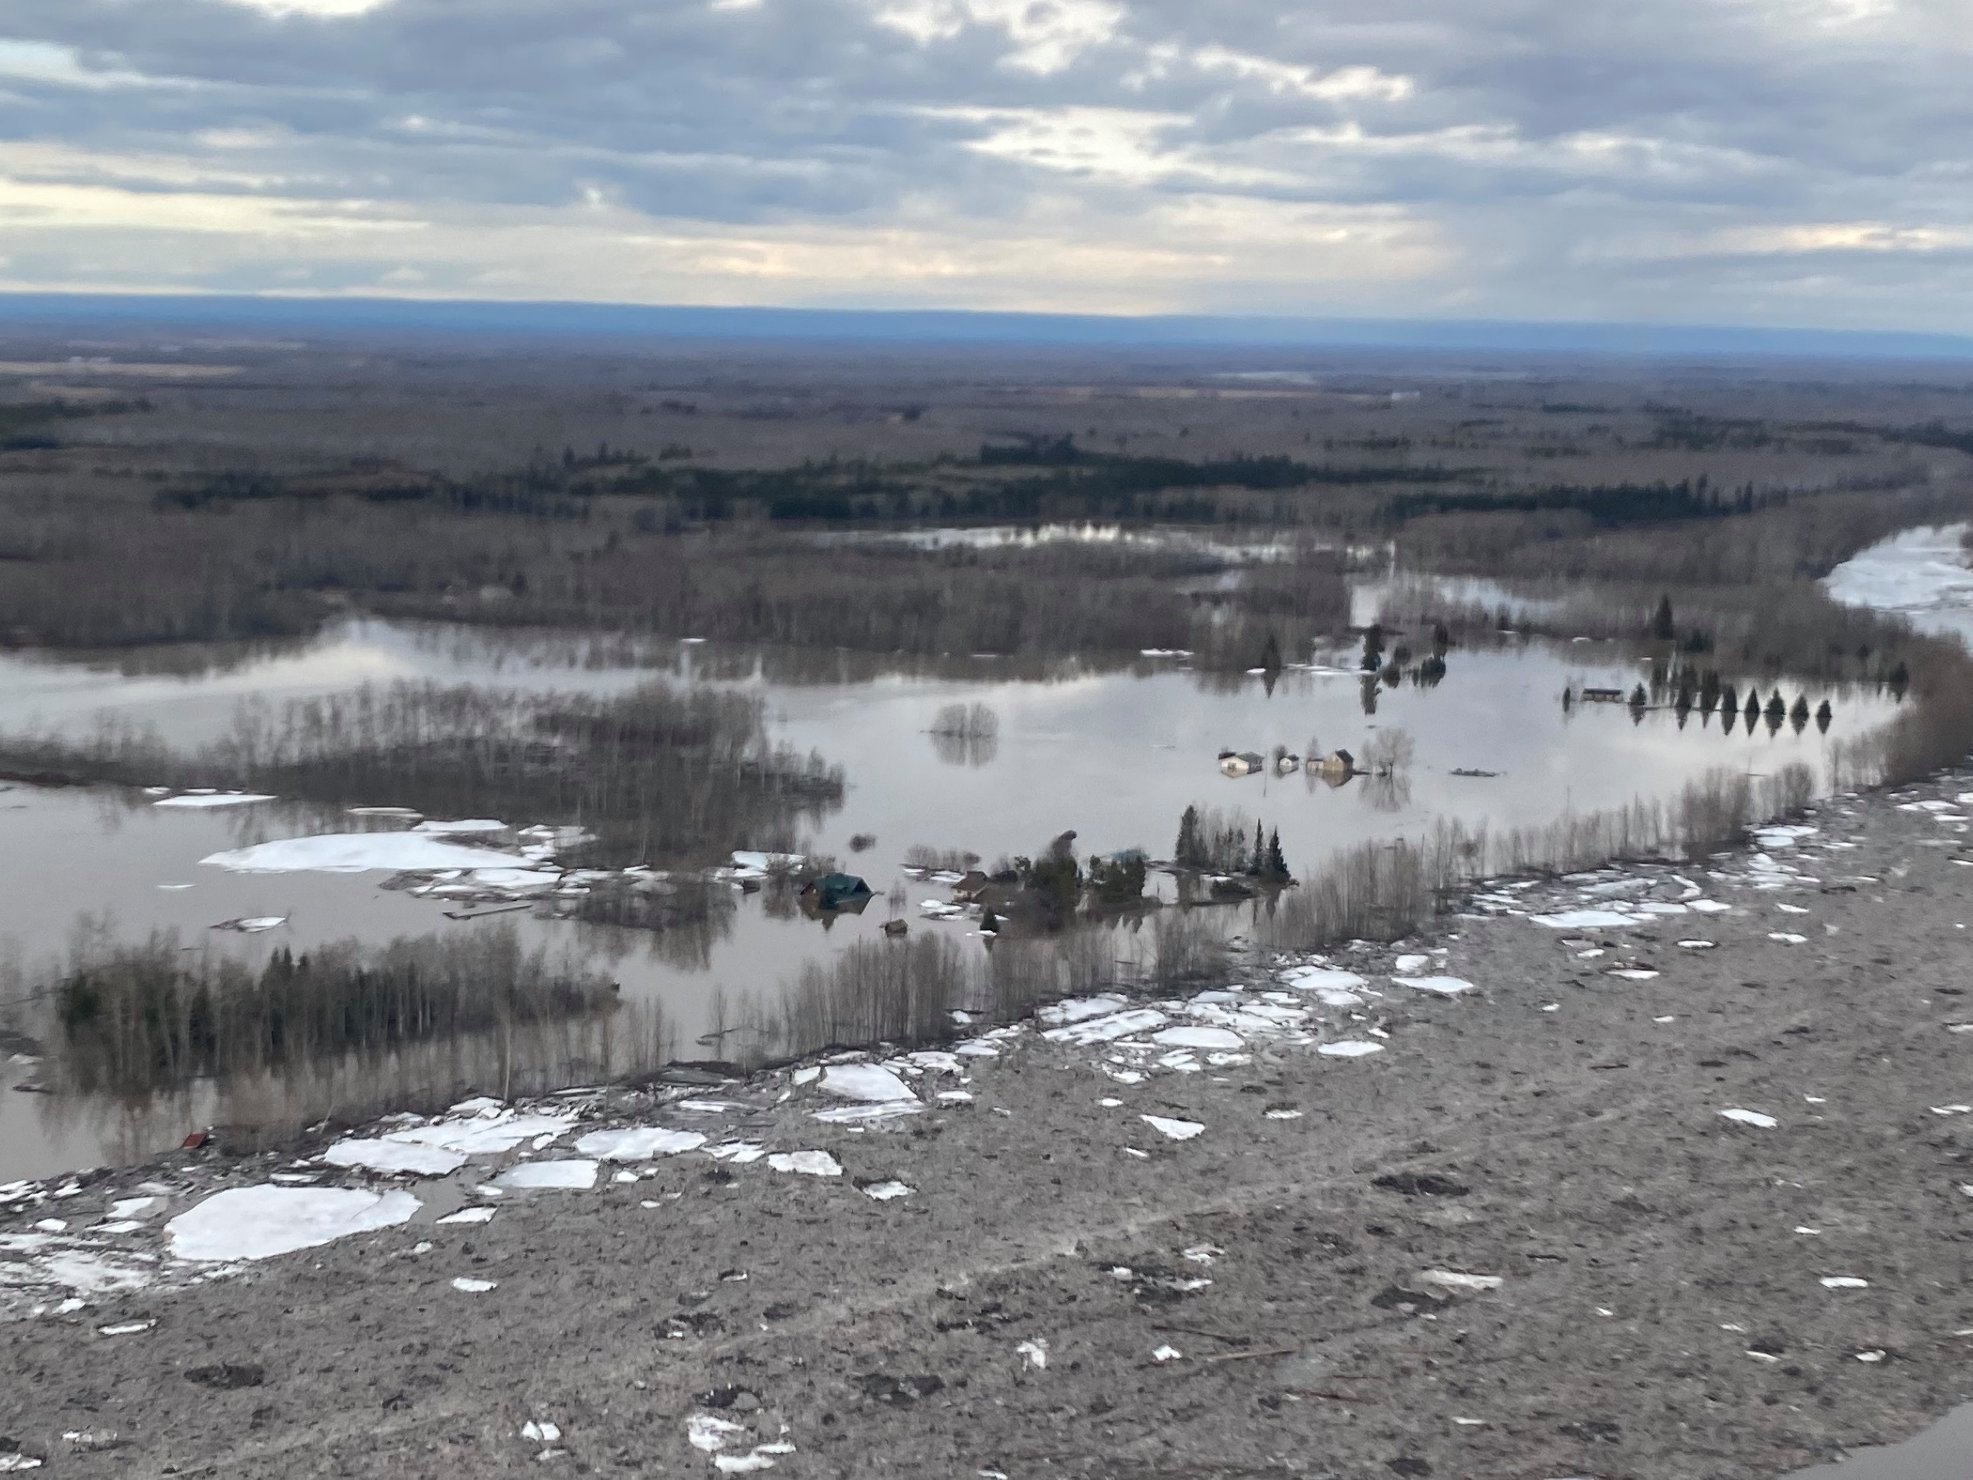 Buttertown flooded in Spring of 2020.
Photo Credit: Jake Fehr